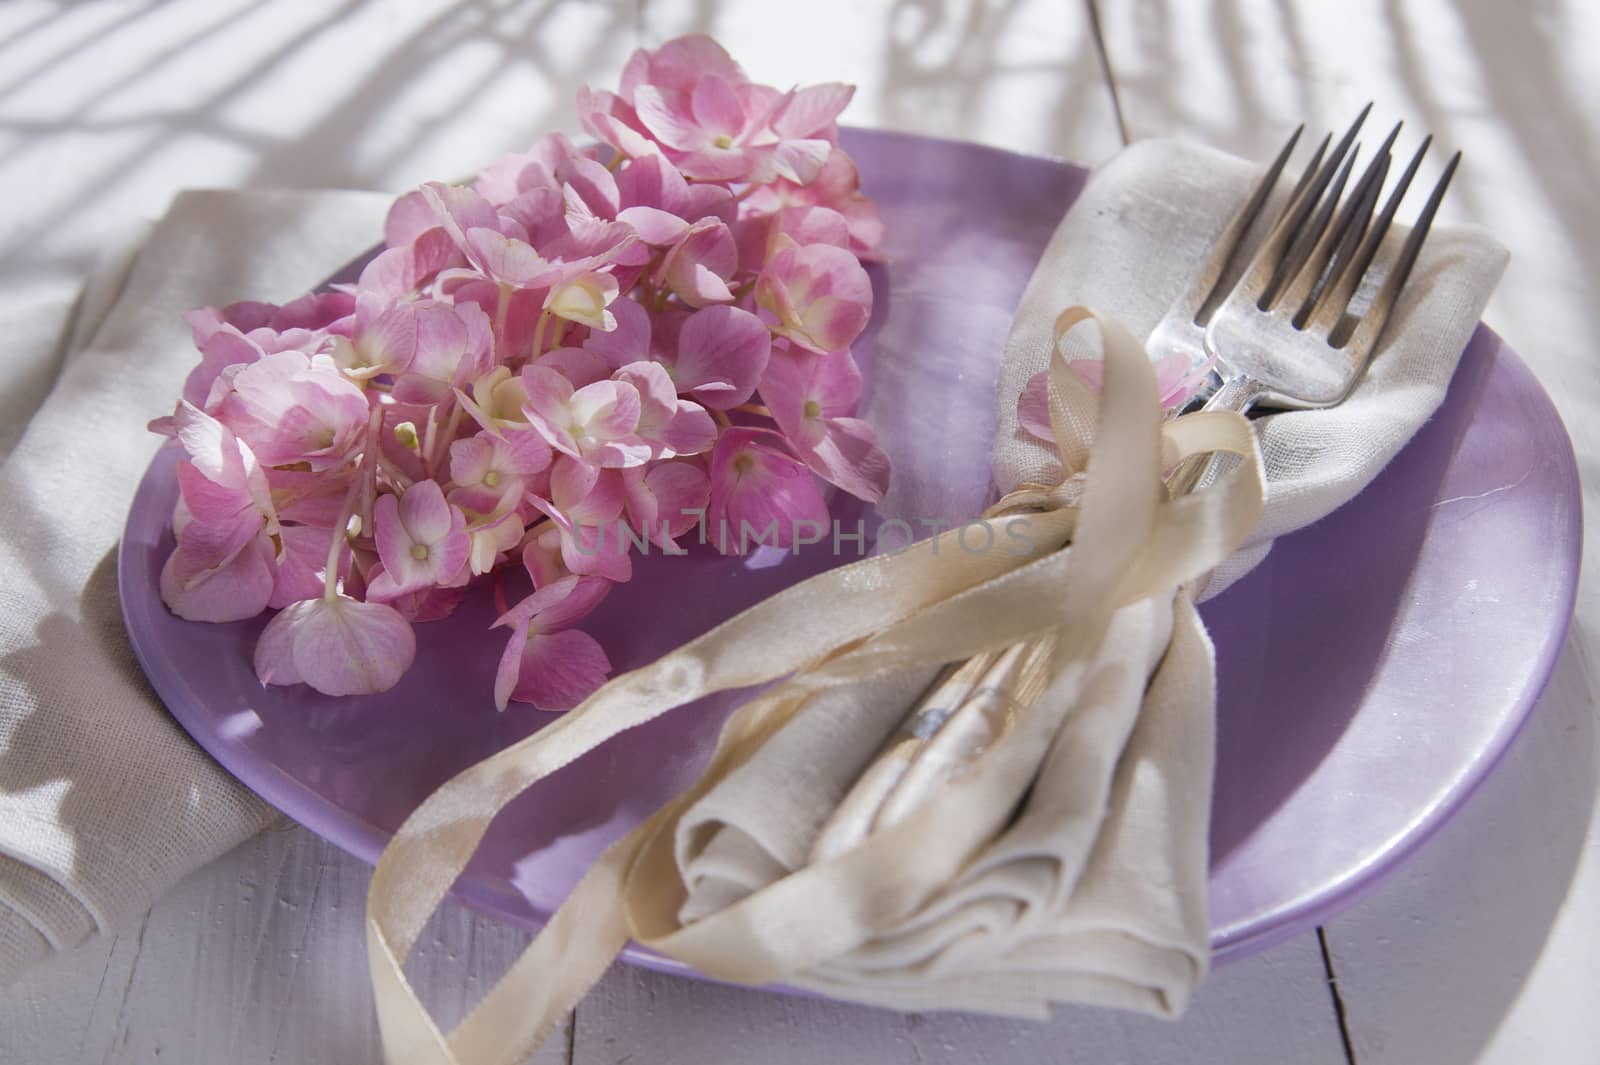 Using the hydrangea flower for the preparation of the table 